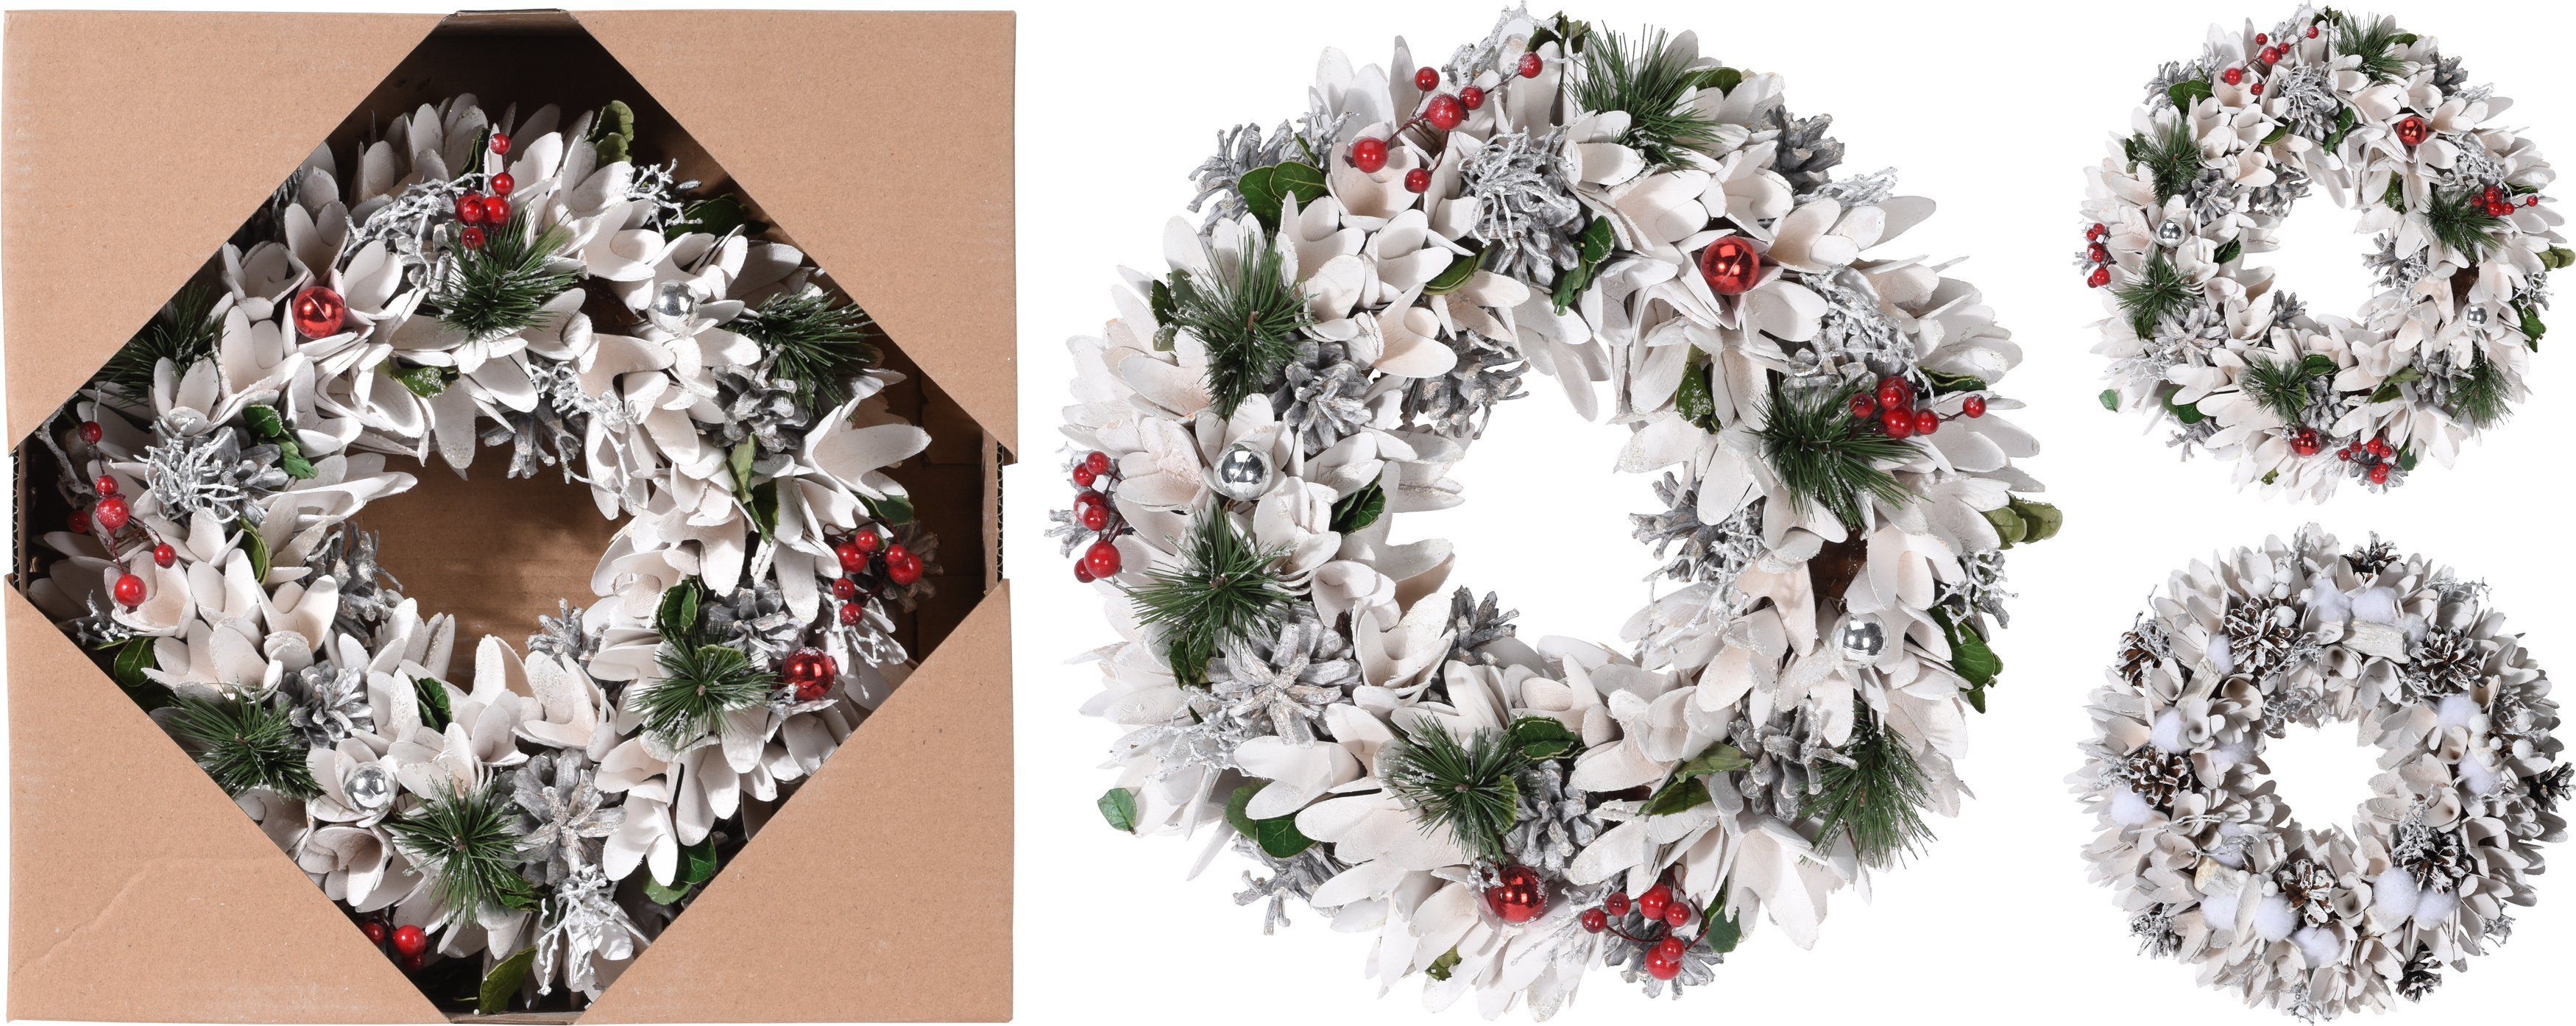 Promotional Snowy Wreath from Pines and Needles